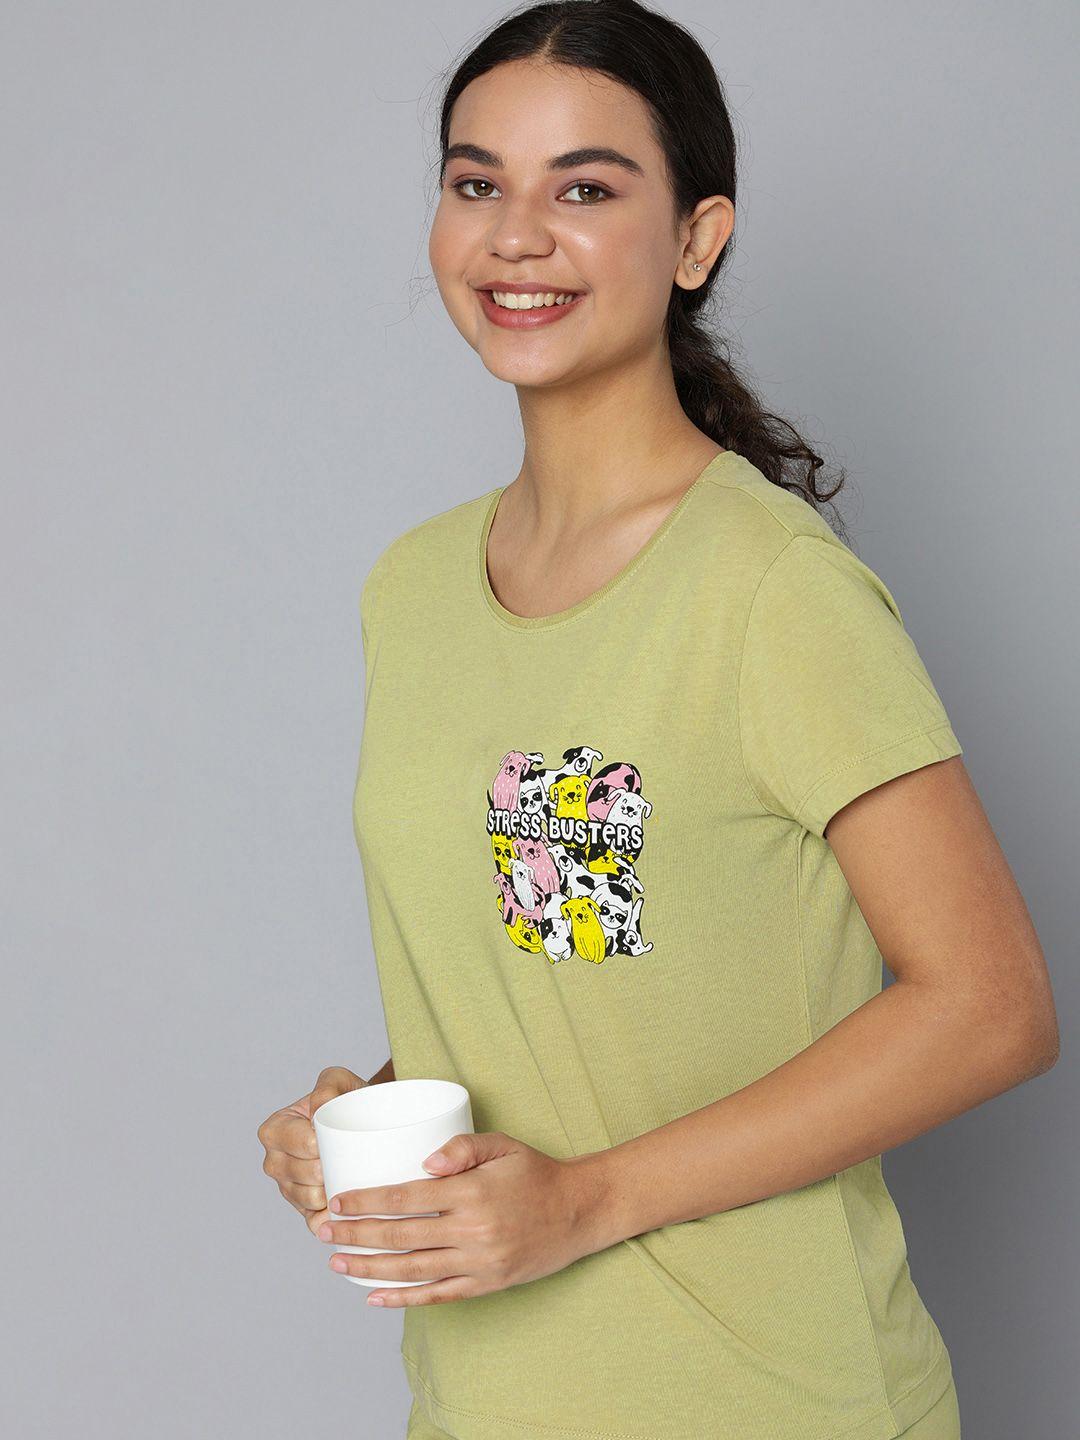 here&now women olive green & pink graphic printed t-shirt